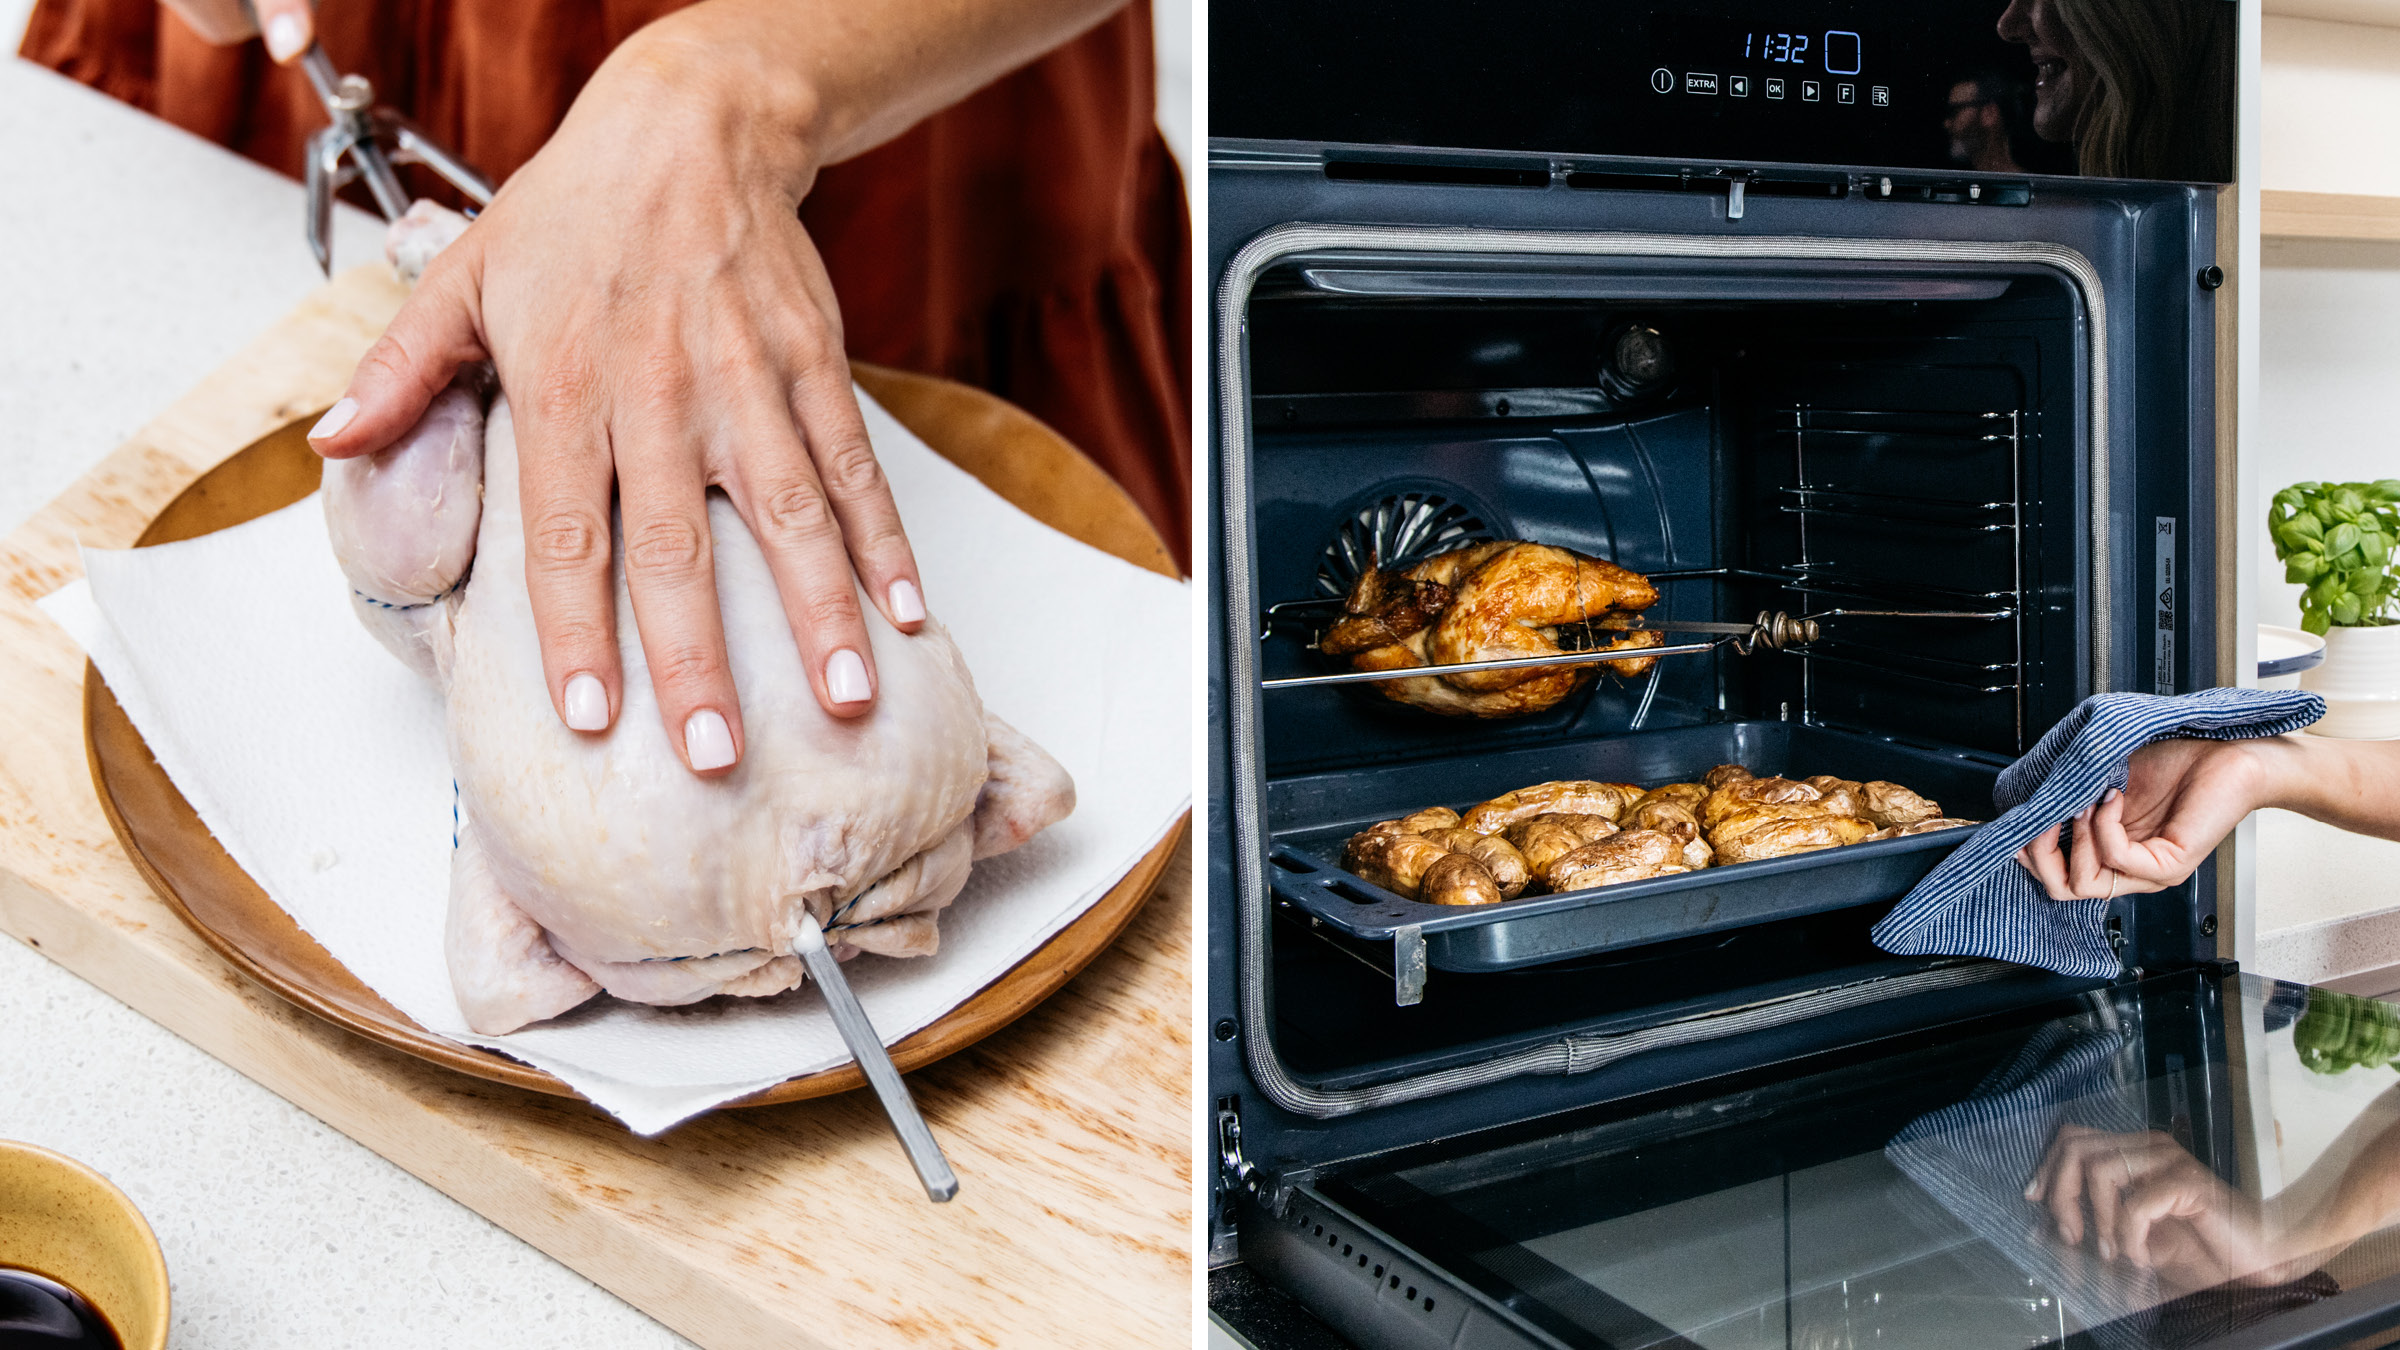 demonstration of inserting the skewer into the chicken and placing in the oven